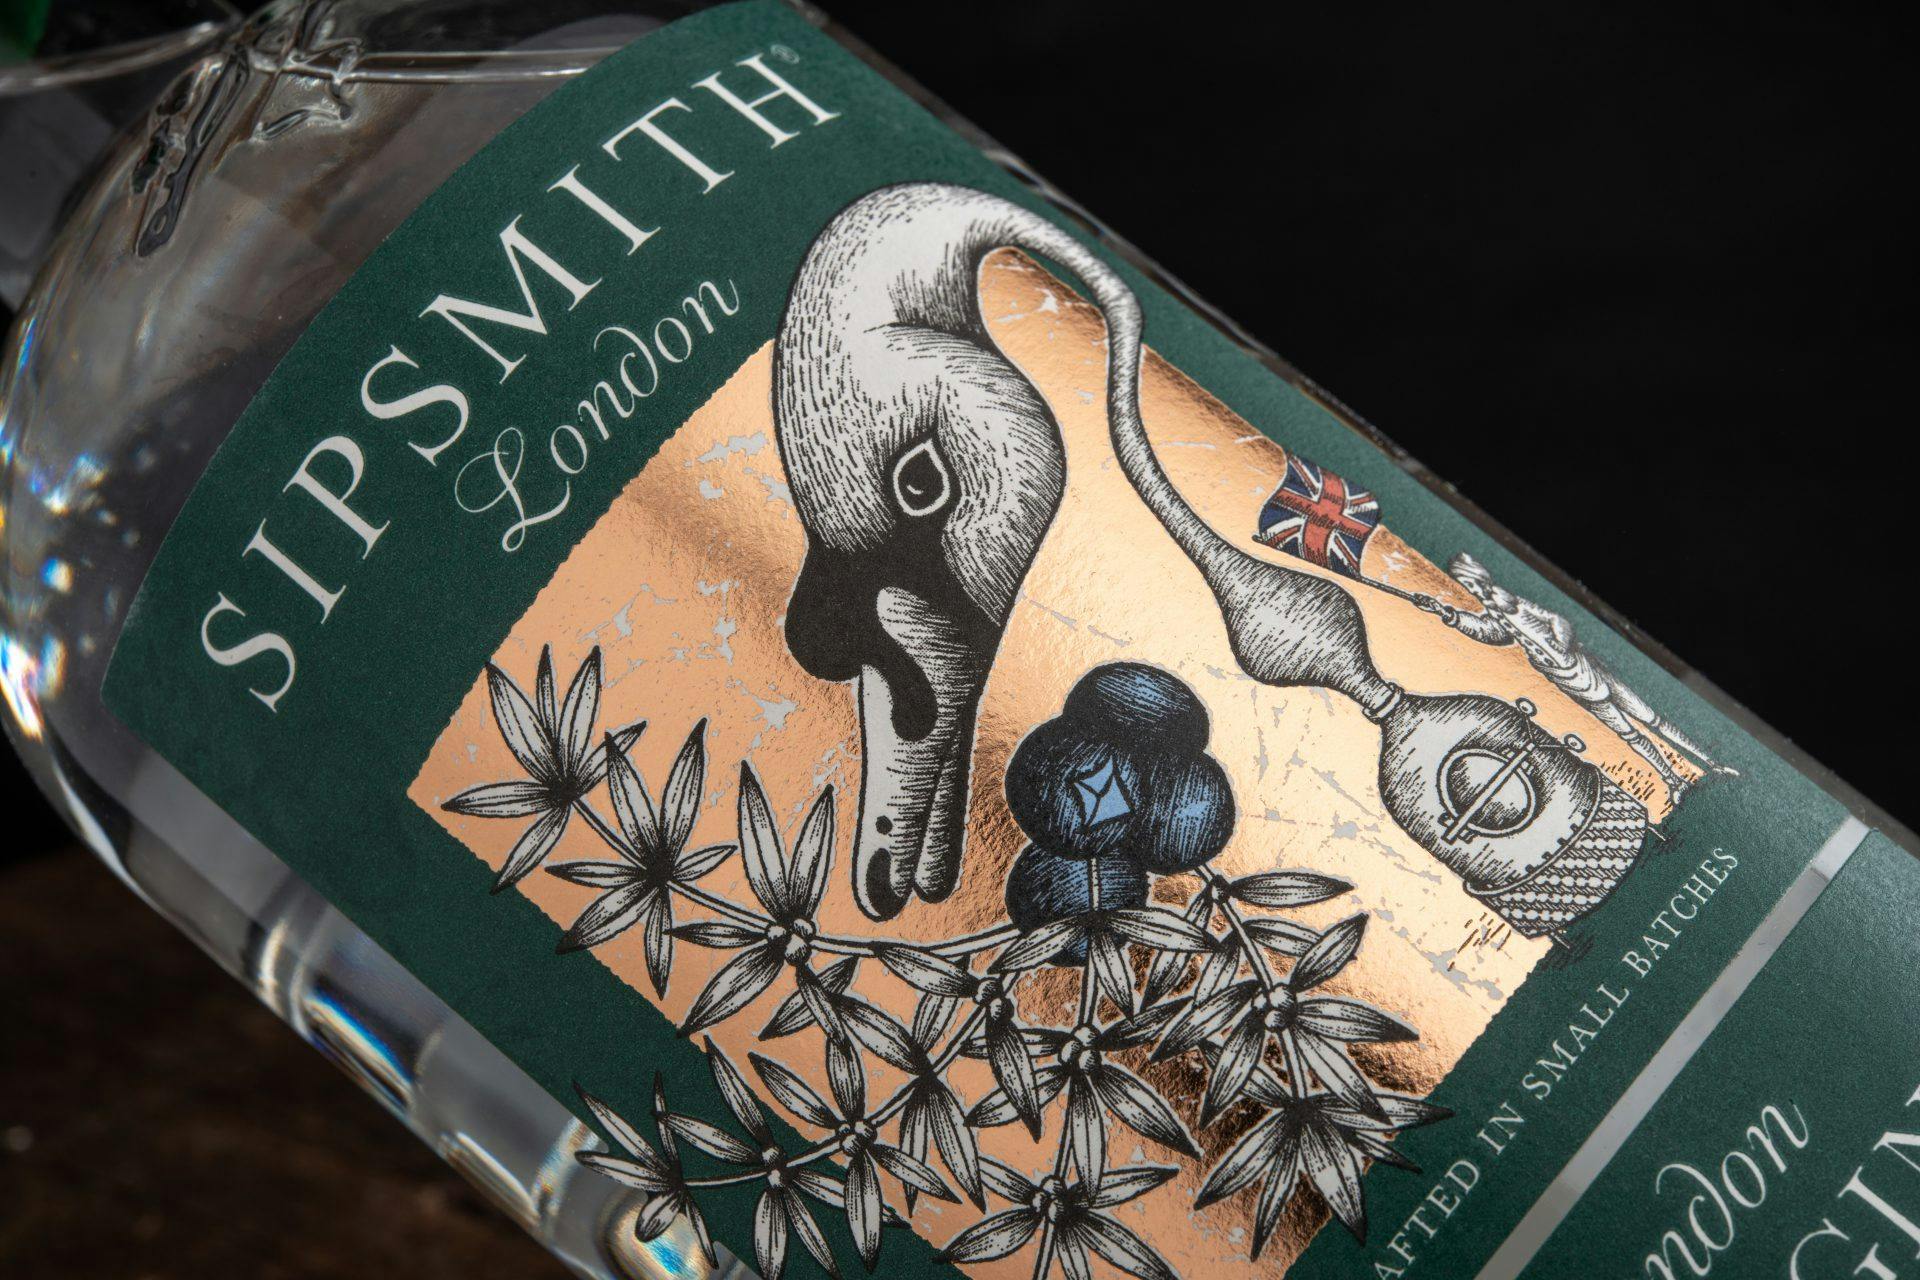 Image of Sipsmith London Gin & Vodka Labels